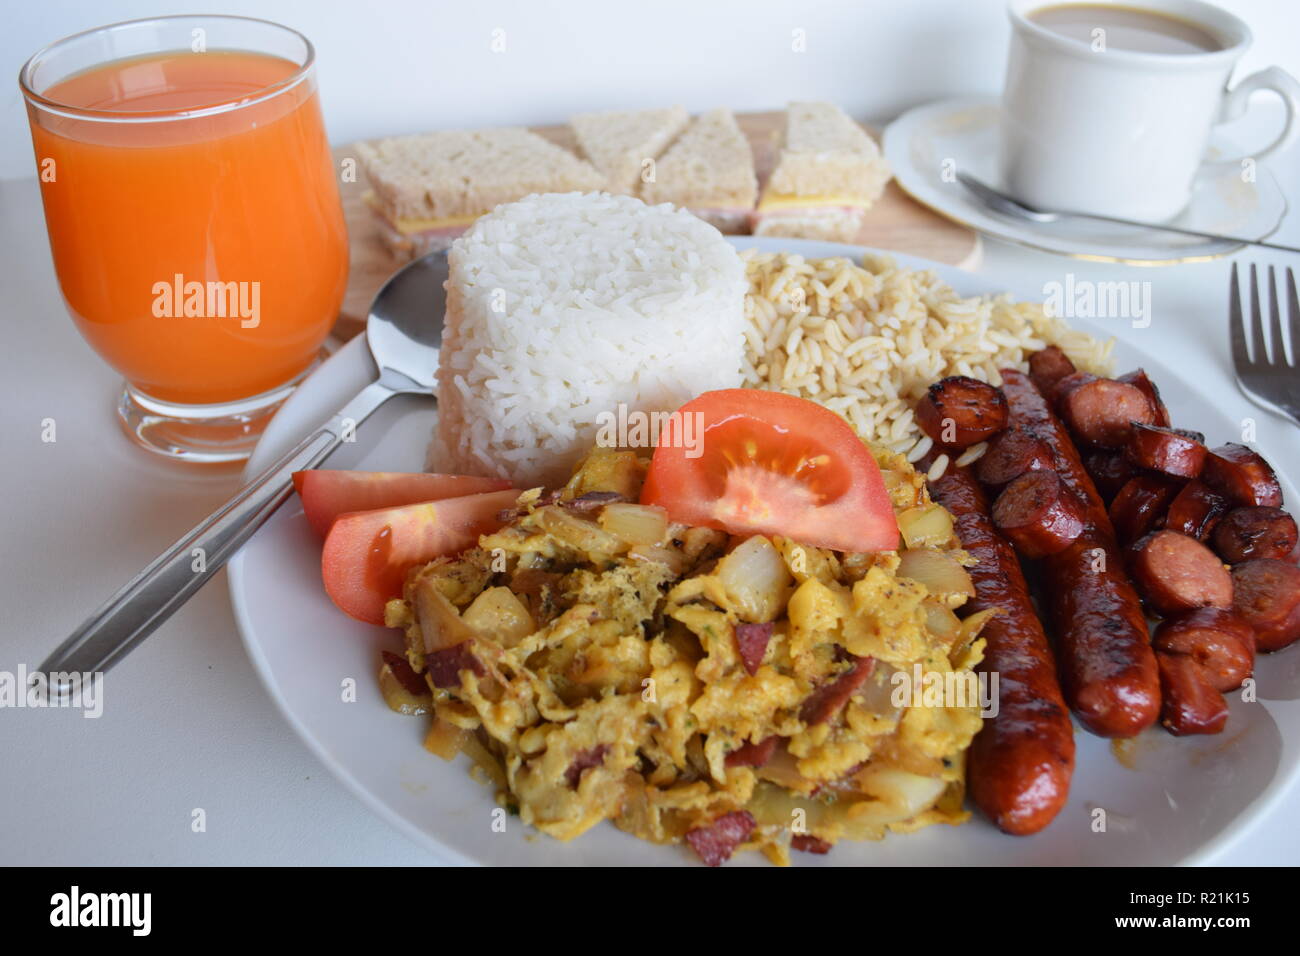 A freshly cooked breakfast of egg, bacon, sausage, tomatoes and rice at Lety’s Transient Homes Baguio. Ein frisch zubereitetes Frühstück mit Ei, Speck Stock Photo